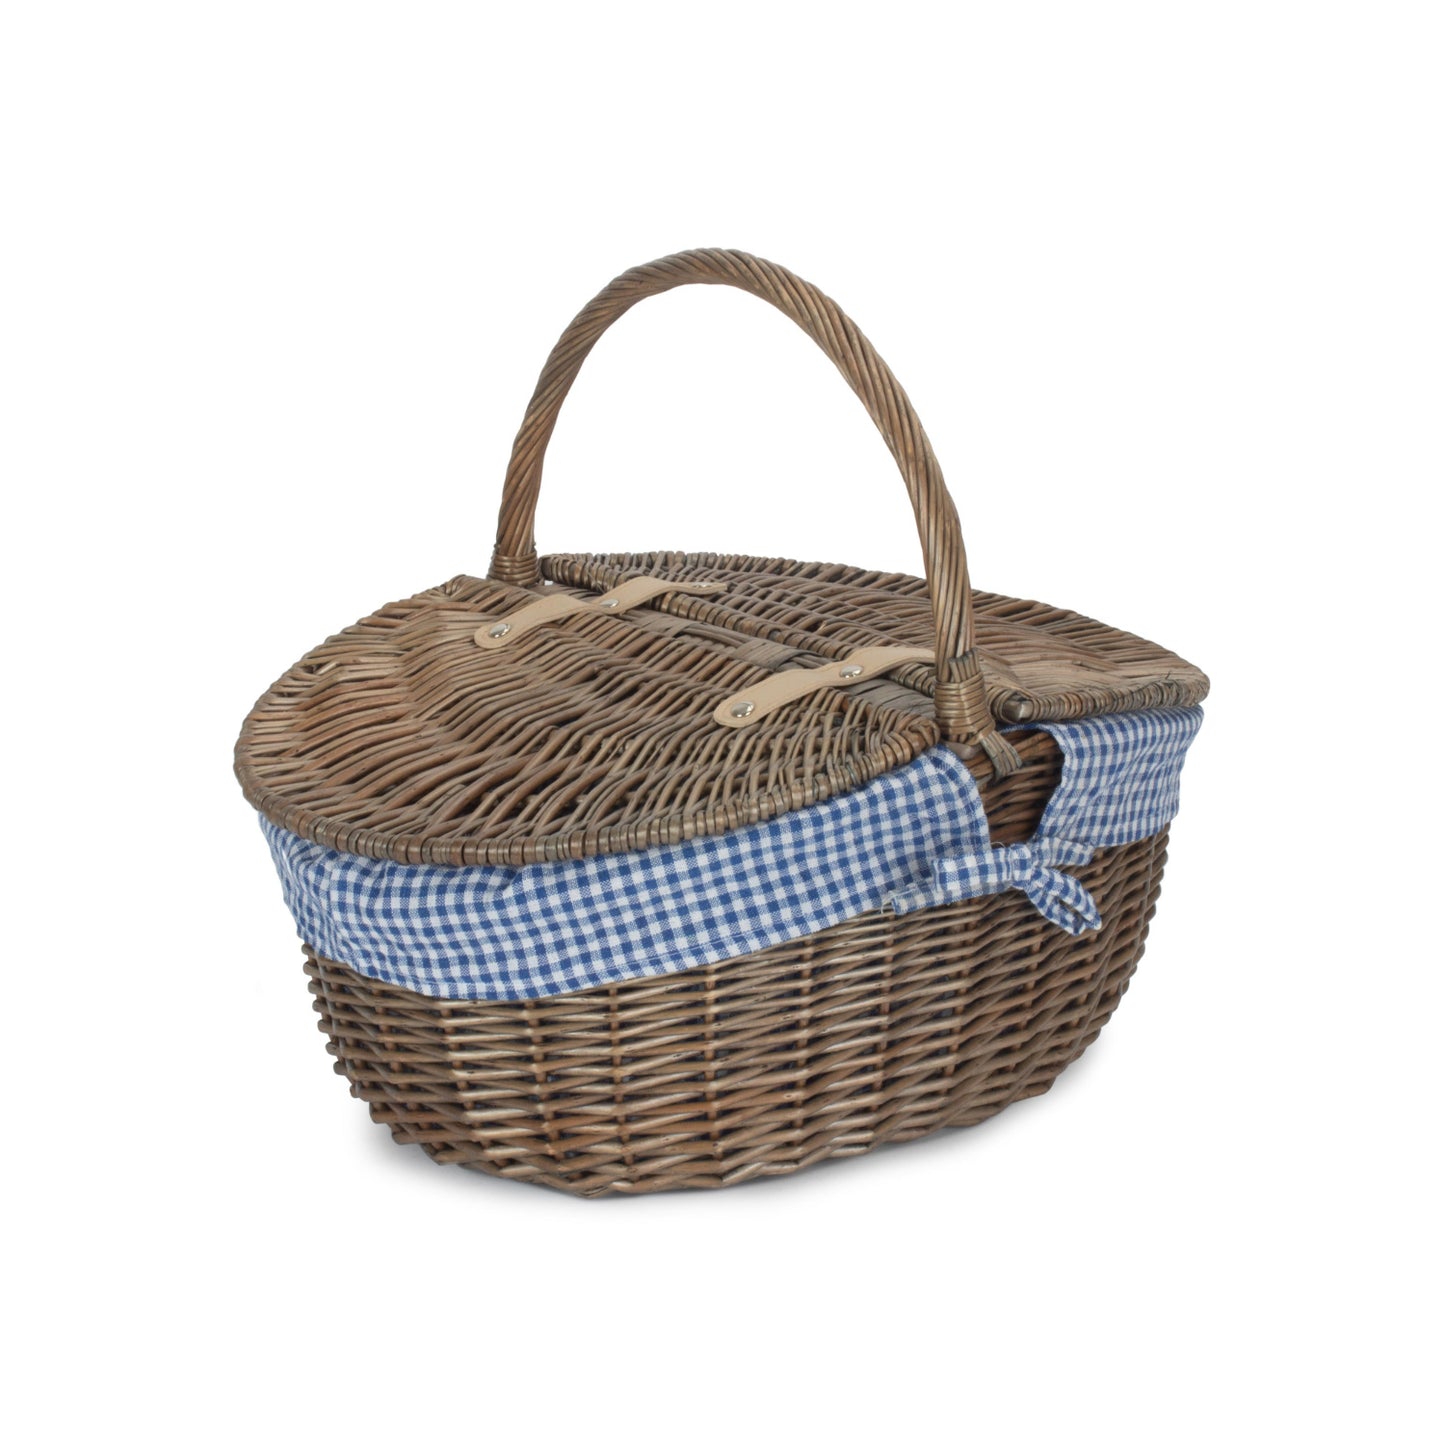 Antique Wash Finish Oval Picnic Basket With Blue & White Checked Lining